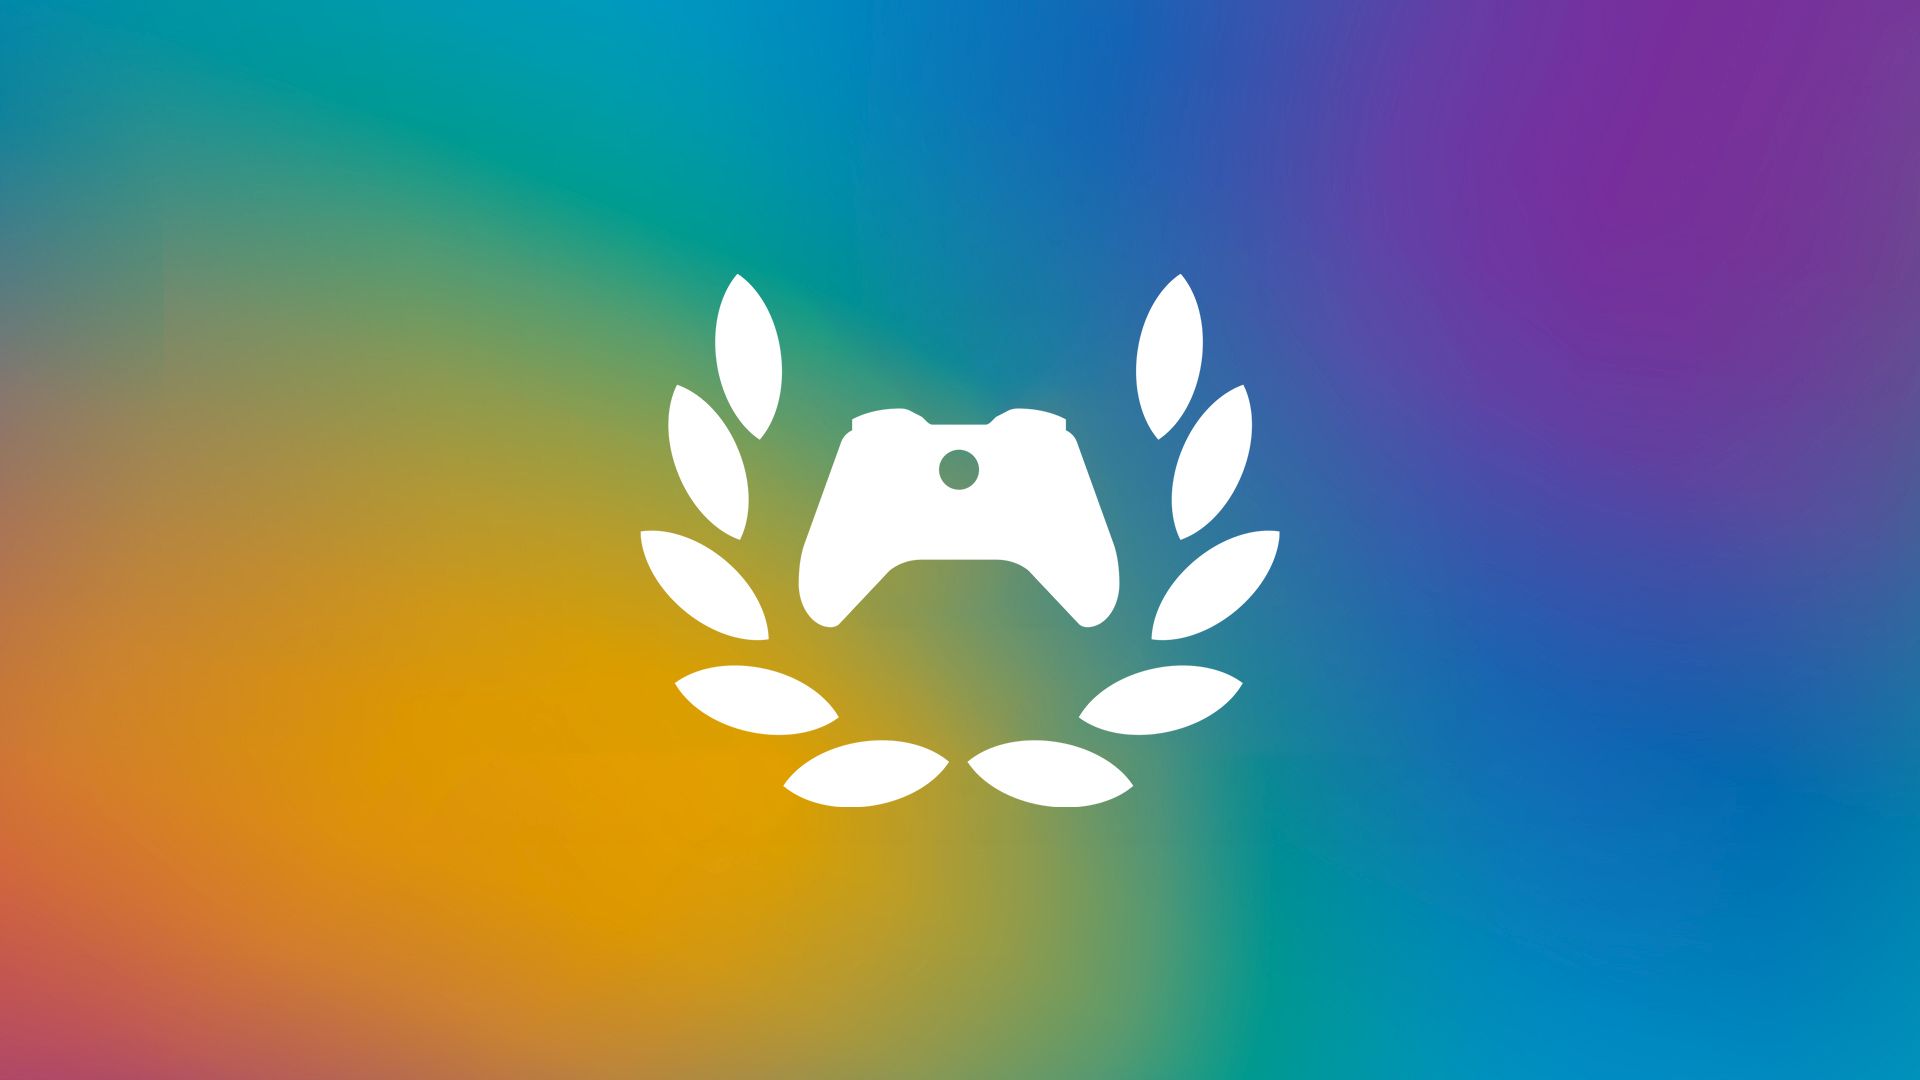 White Xbox controller icon with white laurels surrounding it layers over a blurred rainbow background.